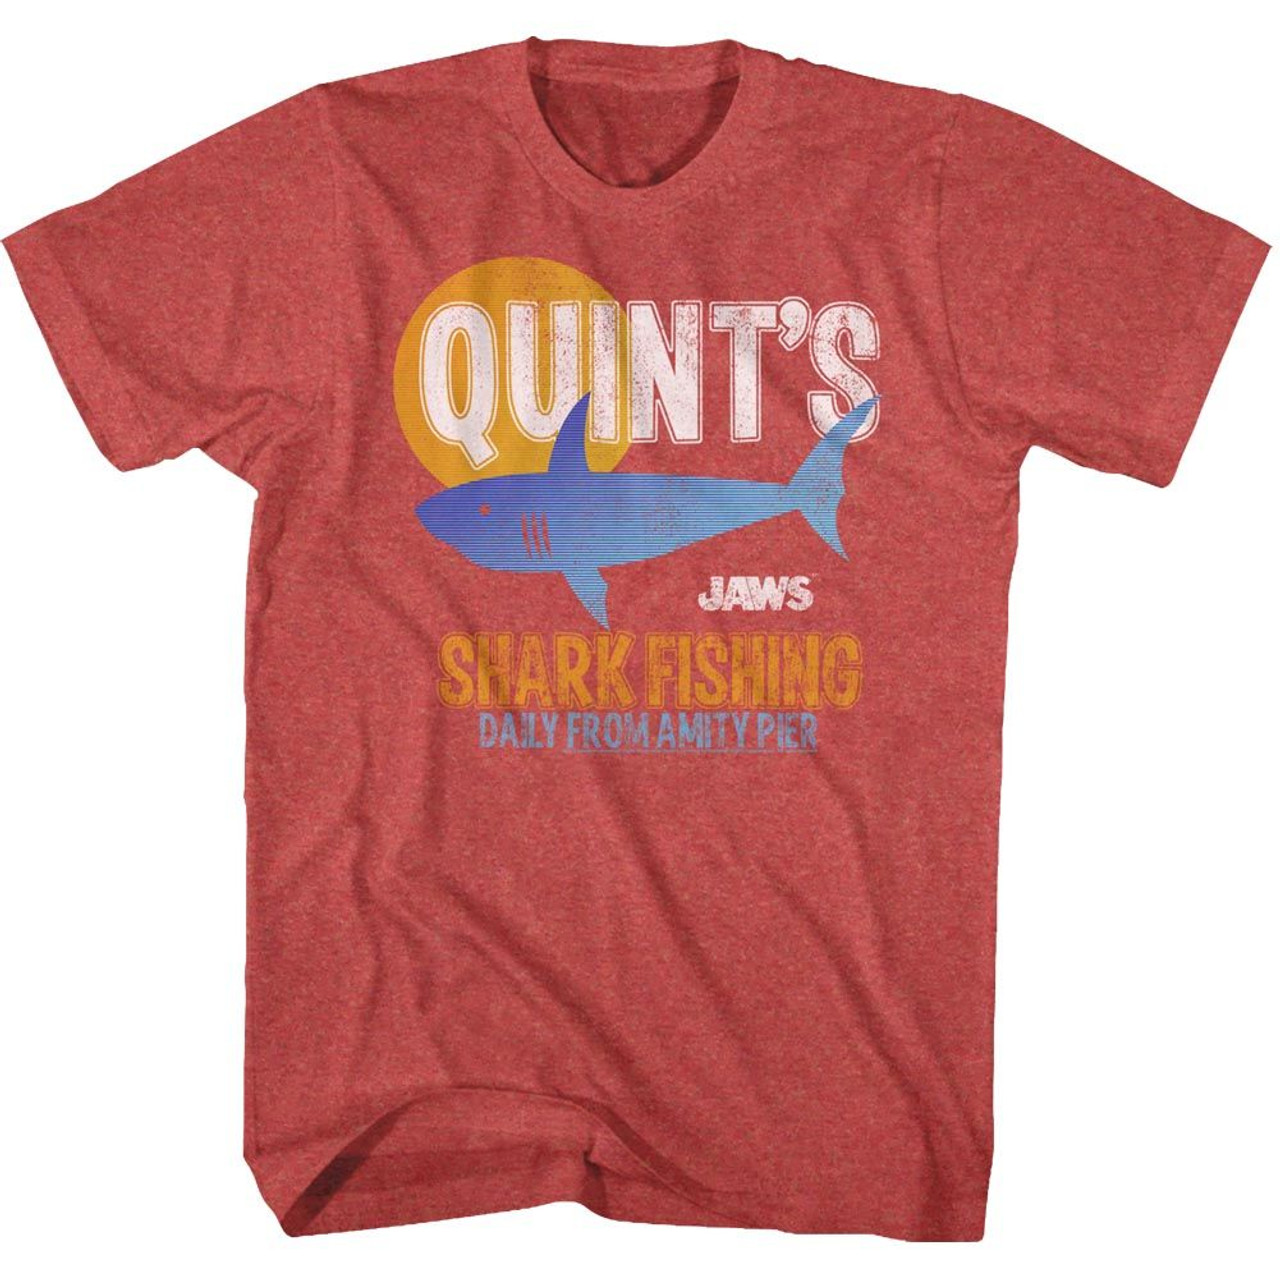 Jaws Quint Fish T-Shirt Size: Large Red